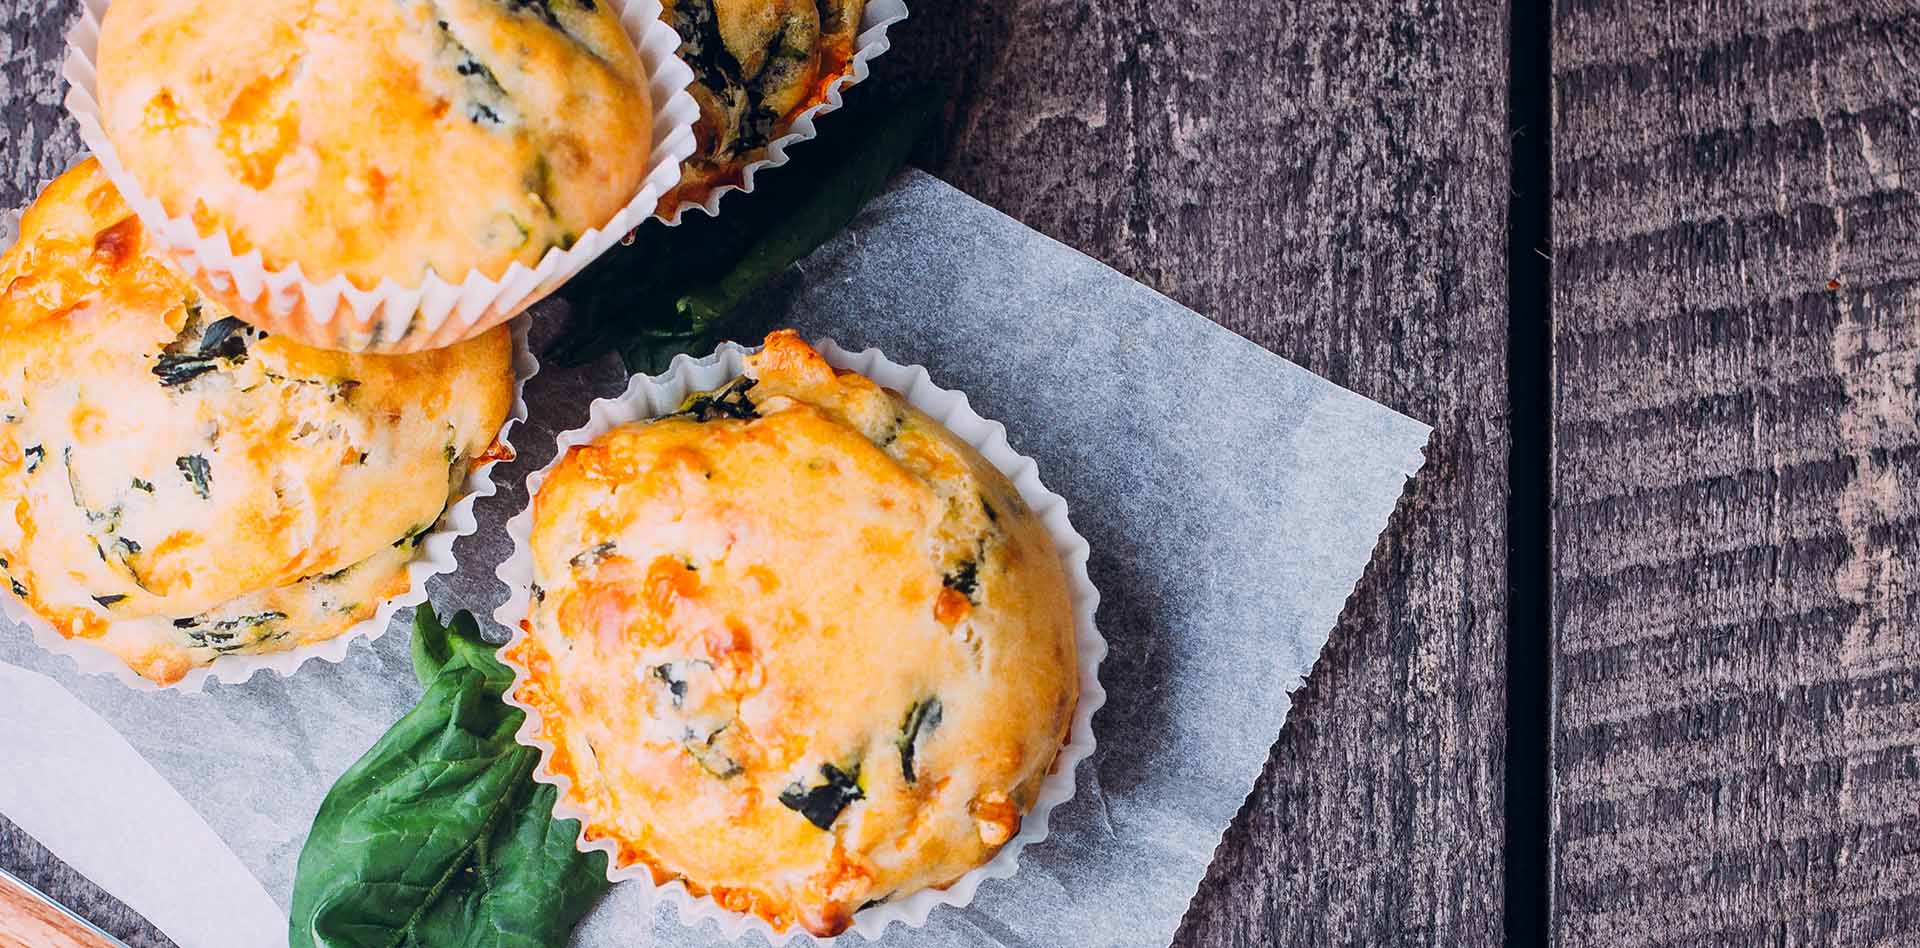 savoury muffins with spinach on wooden background